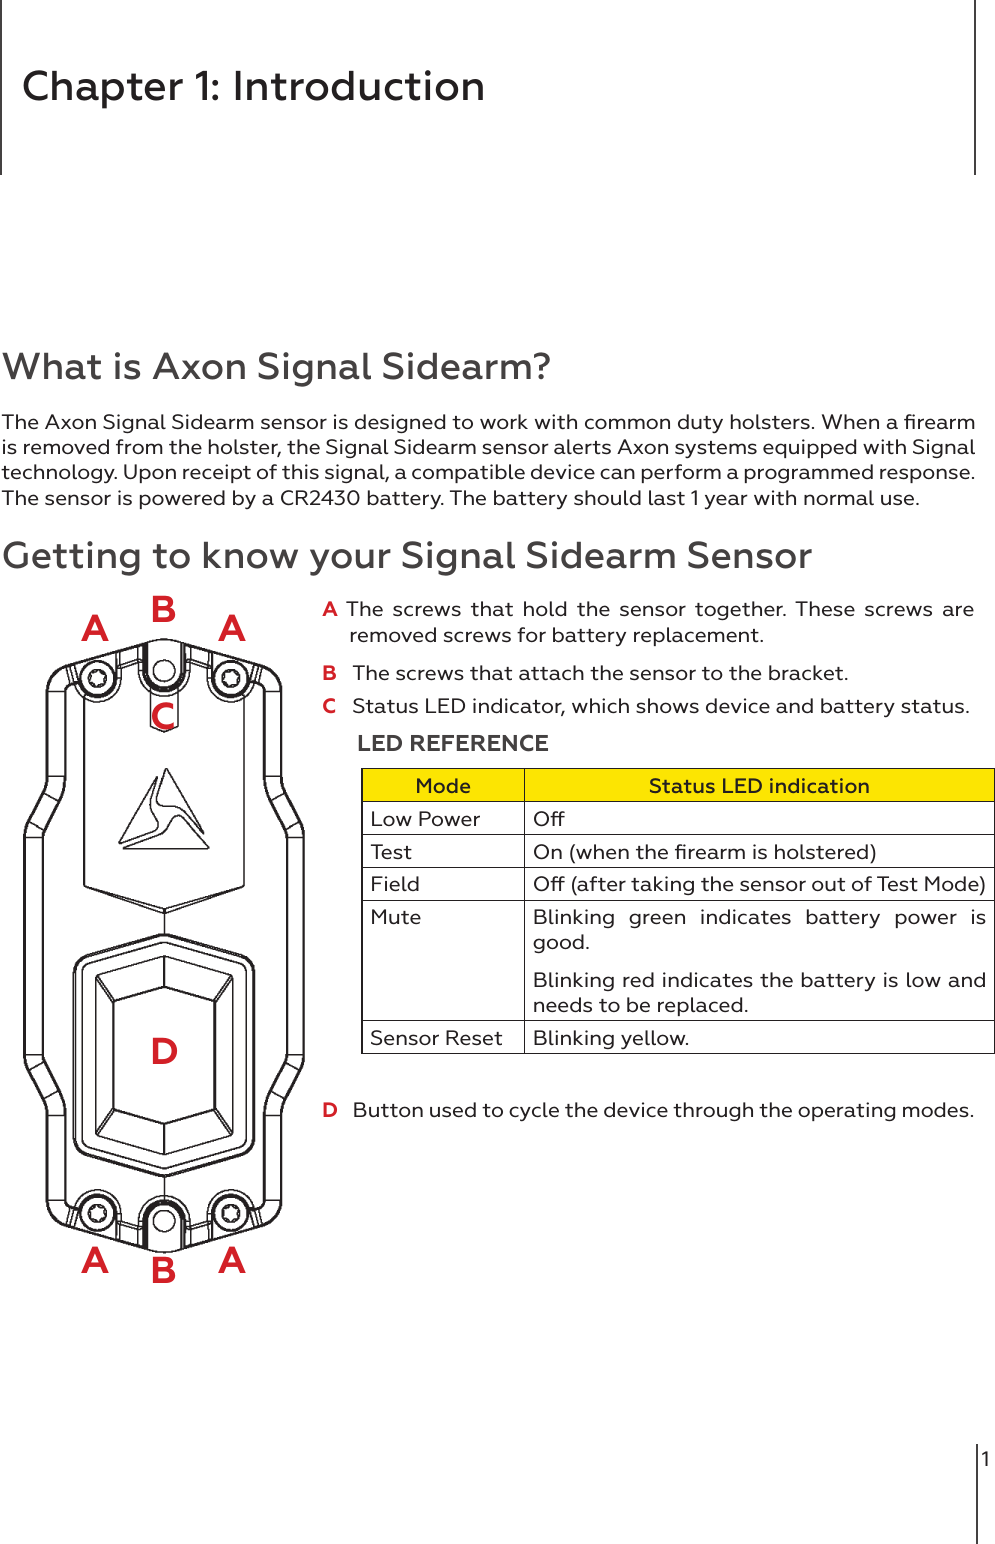 1Chapter 1: IntroductionWhat is Axon Signal Sidearm?The Axon Signal Sidearm sensor is designed to work with common duty holsters. When a ﬁrearm is removed from the holster, the Signal Sidearm sensor alerts Axon systems equipped with Signal technology. Upon receipt of this signal, a compatible device can perform a programmed response. The sensor is powered by a CR2430 battery. The battery should last 1 year with normal use. Getting to know your Signal Sidearm SensorAA The screws that hold the sensor together. These screws are      removed screws for battery replacement. B   The screws that attach the sensor to the bracket. C   Status LED indicator, which shows device and battery status.      LED REFERENCEMode Status LED indicationLow Power OTest On (when the ﬁrearm is holstered)Field O (after taking the sensor out of Test Mode)Mute Blinking green indicates battery power is good.Blinking red indicates the battery is low and needs to be replaced.Sensor Reset Blinking yellow. D   Button used to cycle the device through the operating modes. AA ABBDC